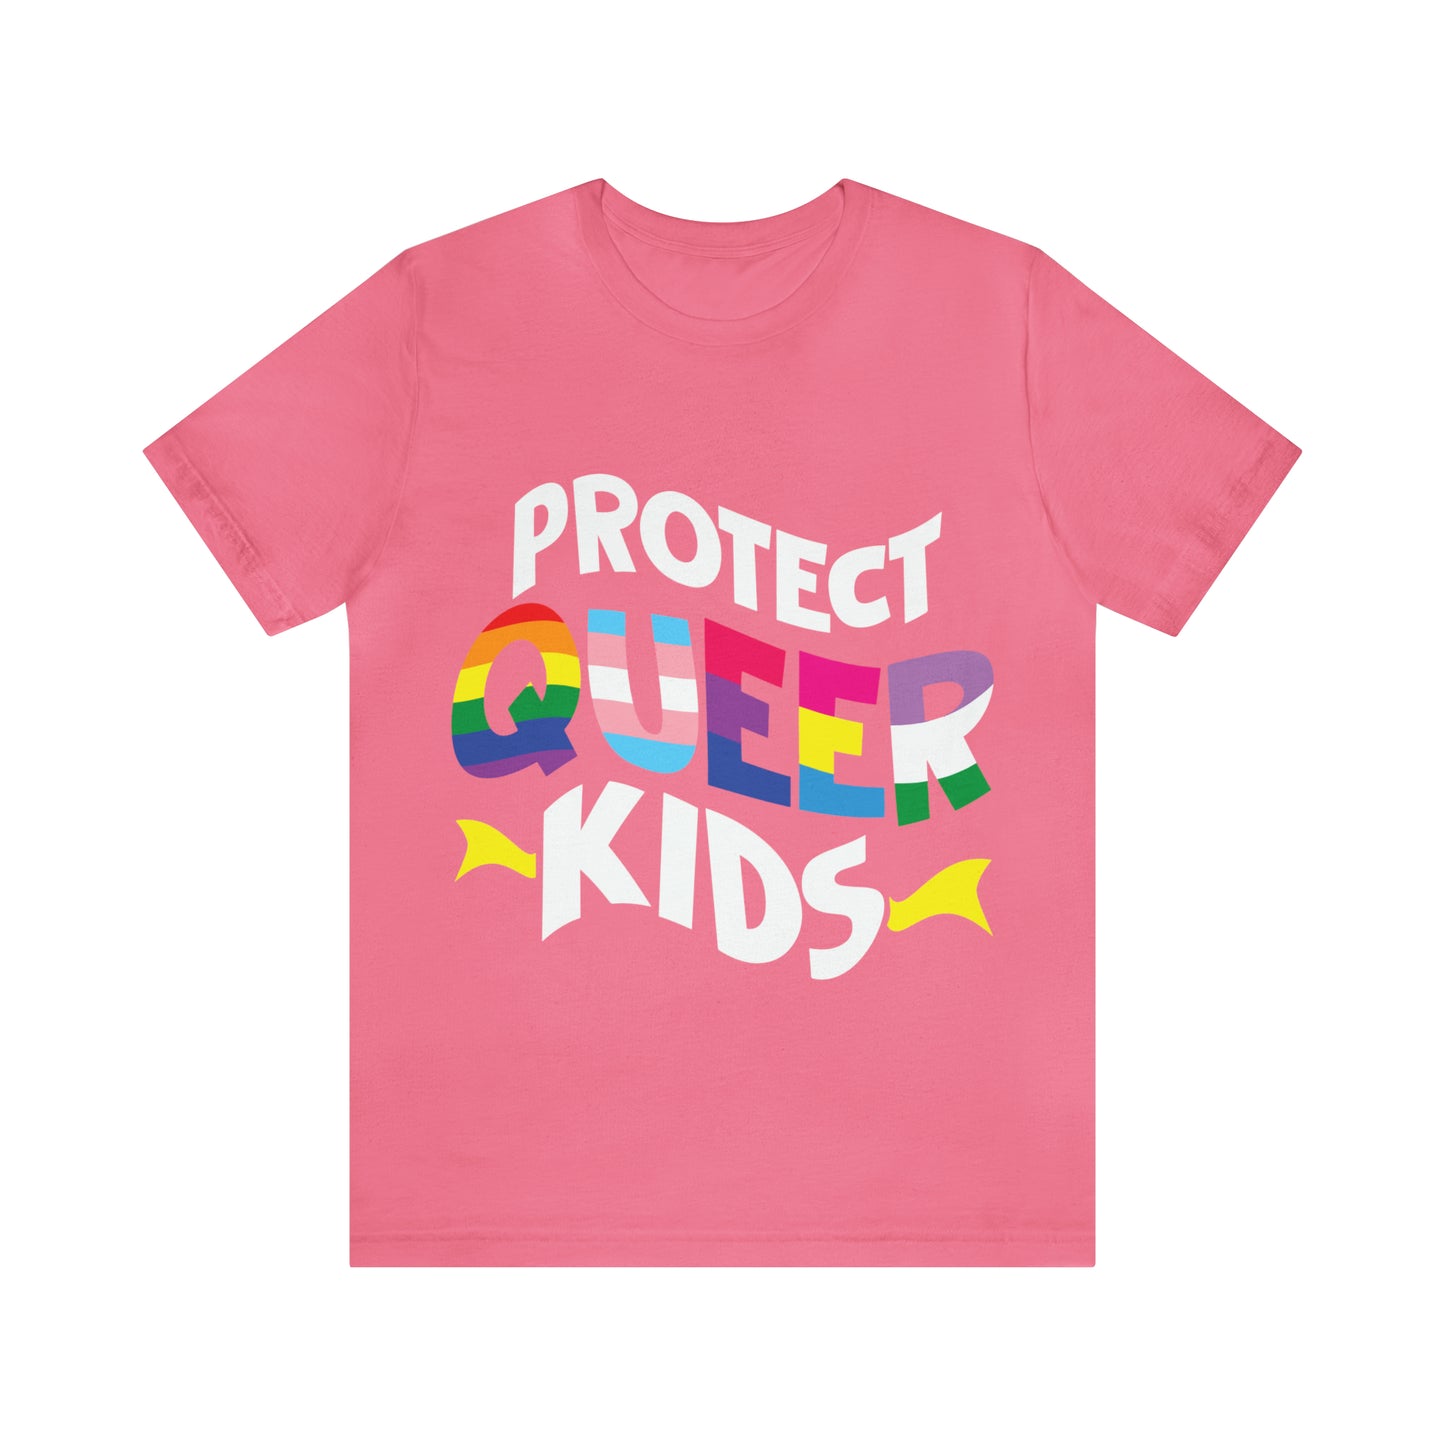 Protect Queer Kids - Unisex T-Shirt